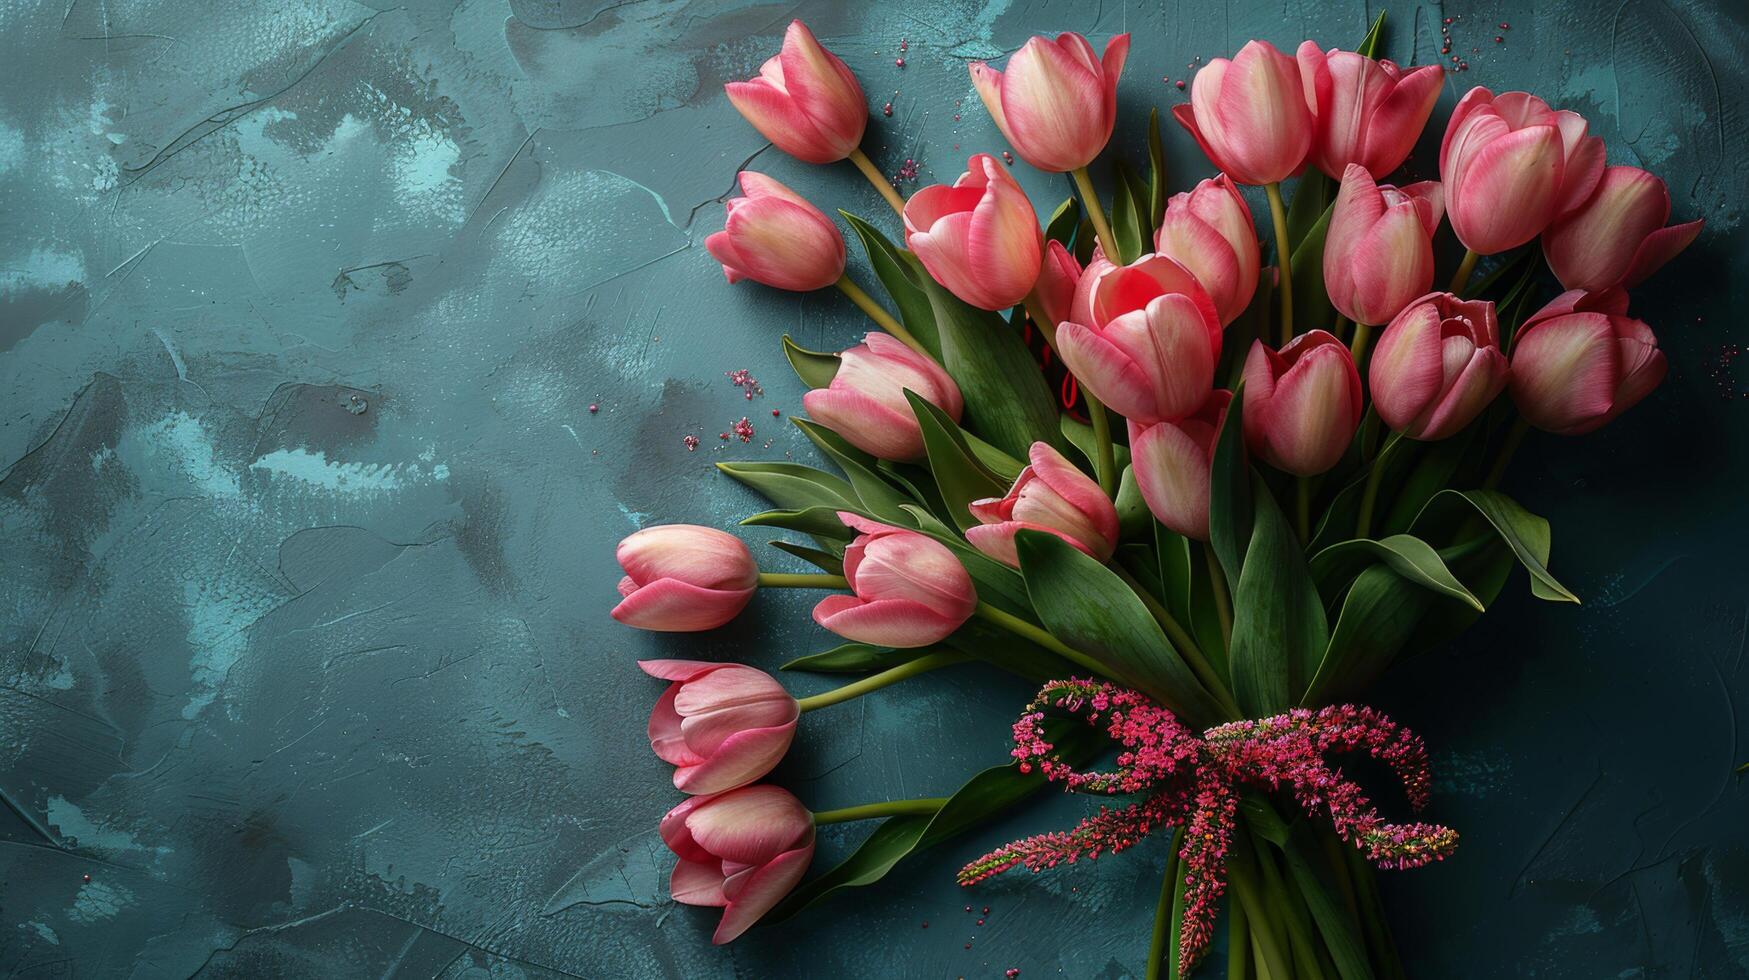 A bouquet of pink tulips arranged on a textured teal background, creating a vibrant flat lay perfect for Mother's Day and spring themes. photo